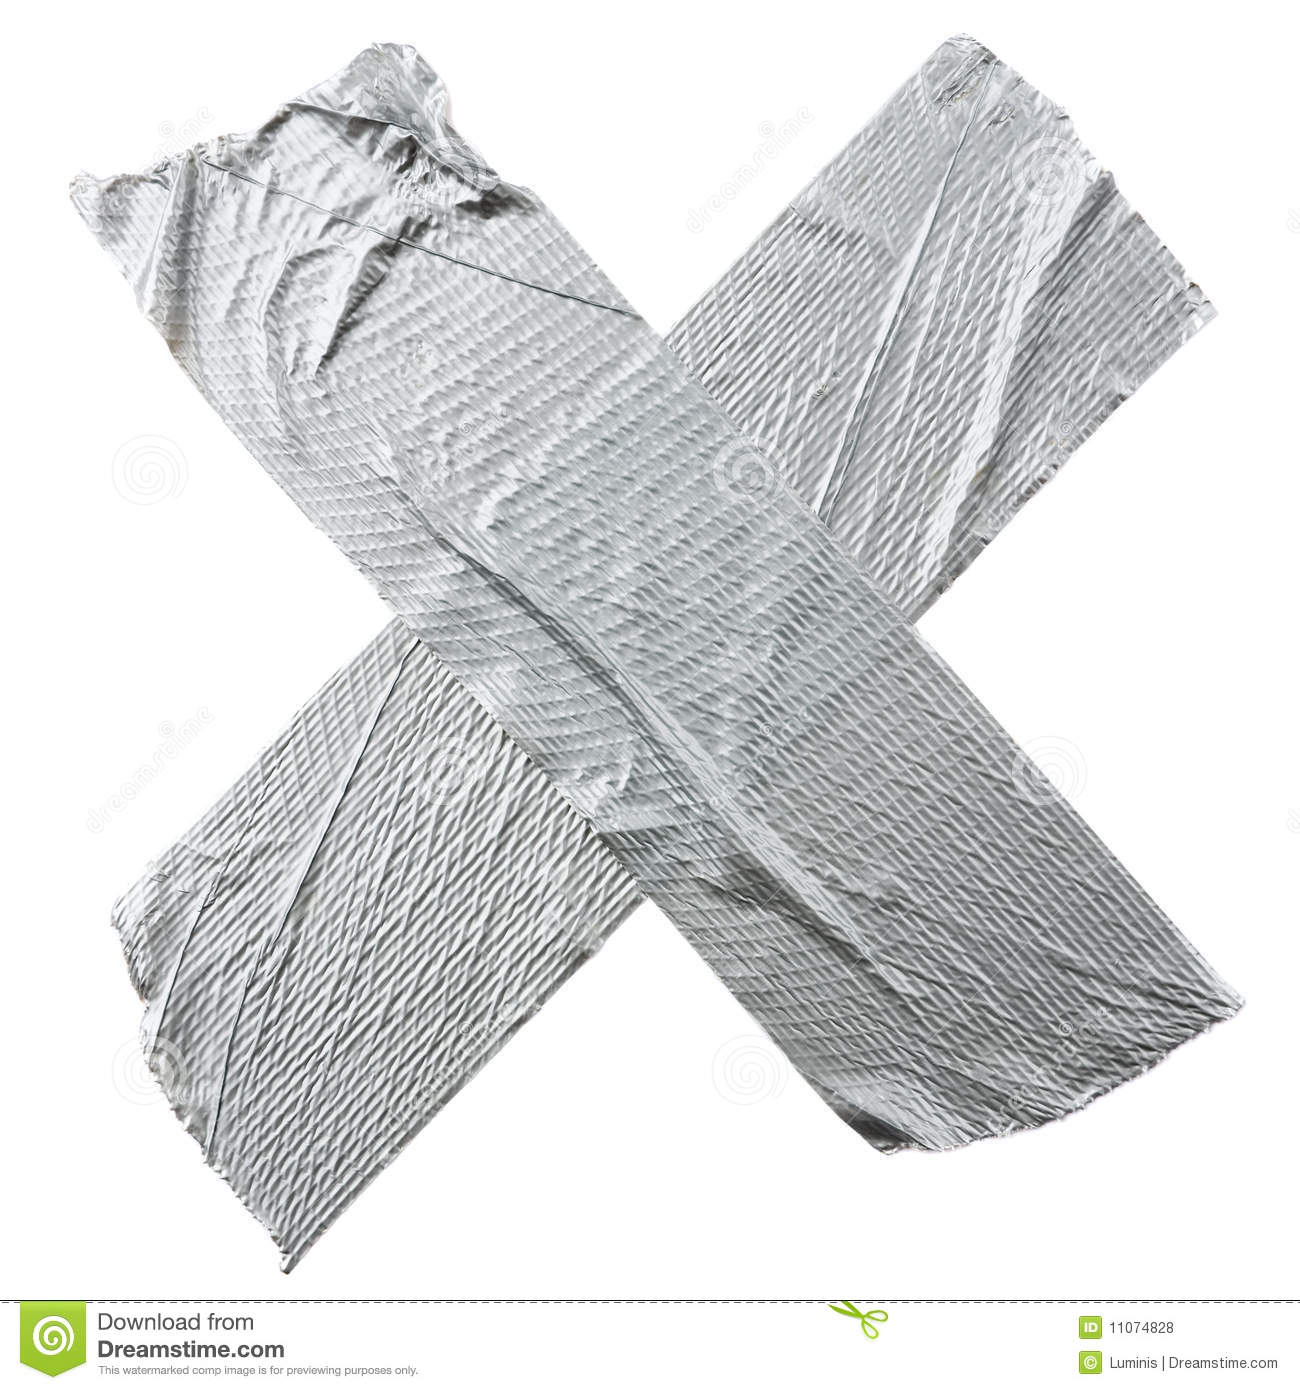 Crossed Duct Tape Strips Royalty Free Stock Photos   Image  11074828